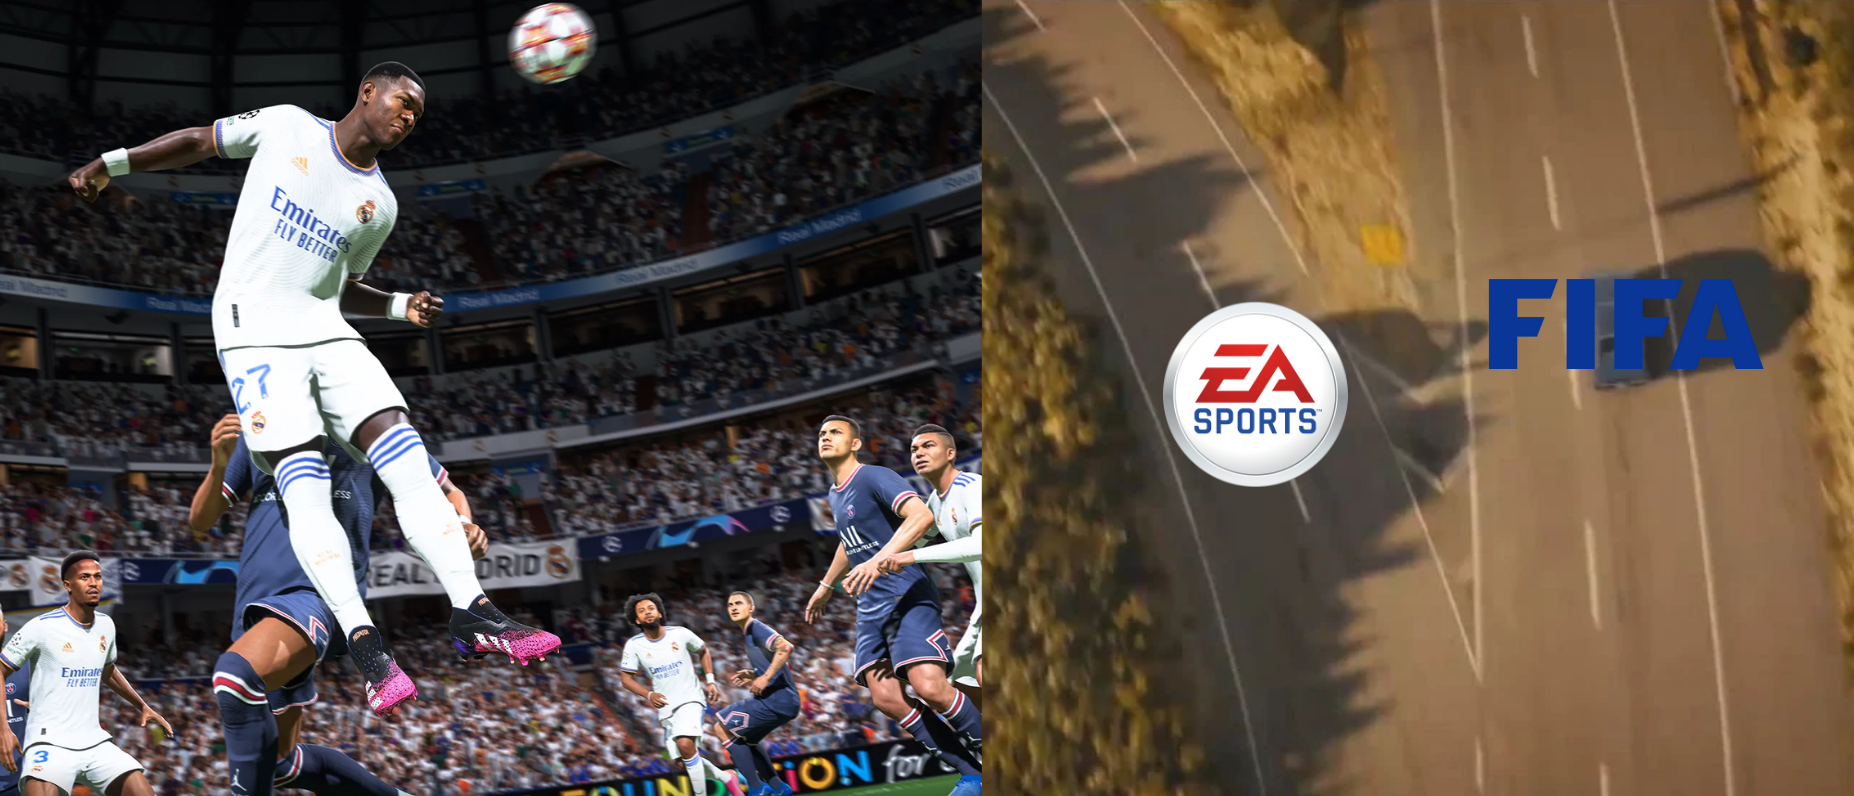 So long old friend. The future games from the company will later be released under the new EA Sports FC banner. 